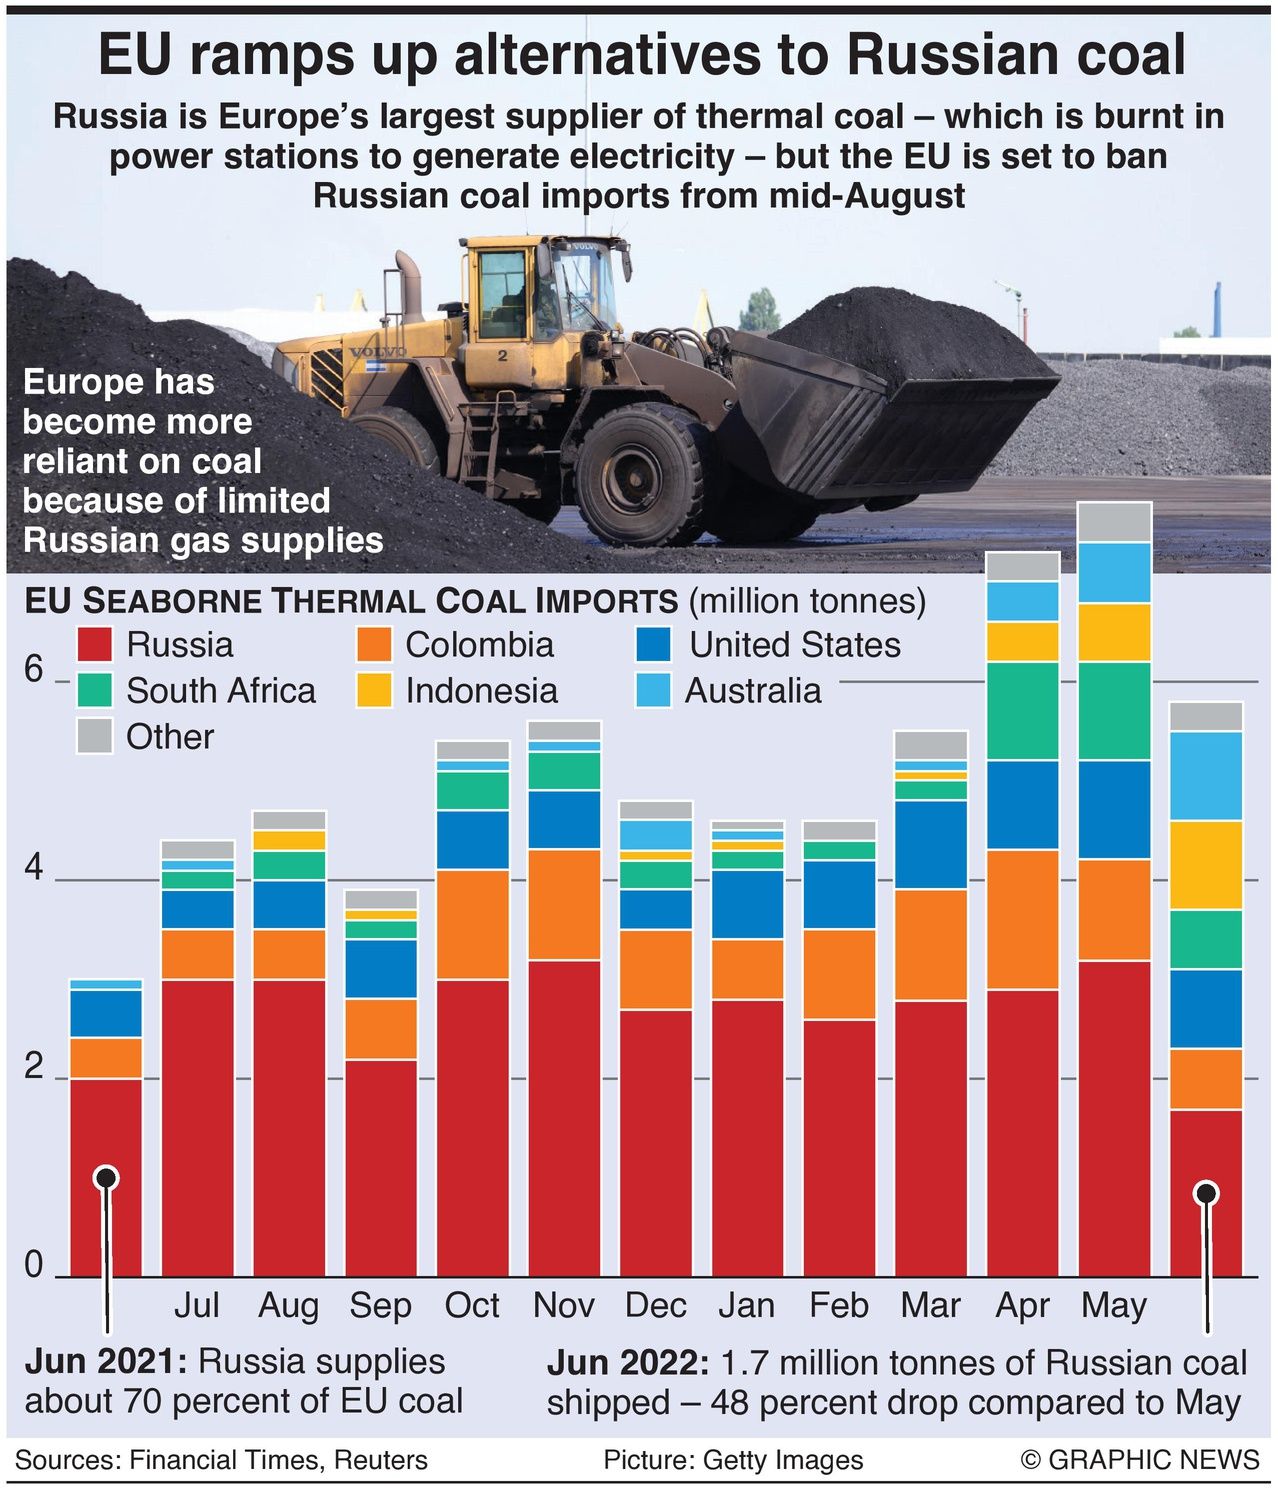 Infographic depicting the amount of coal and its origins that the European Union imports